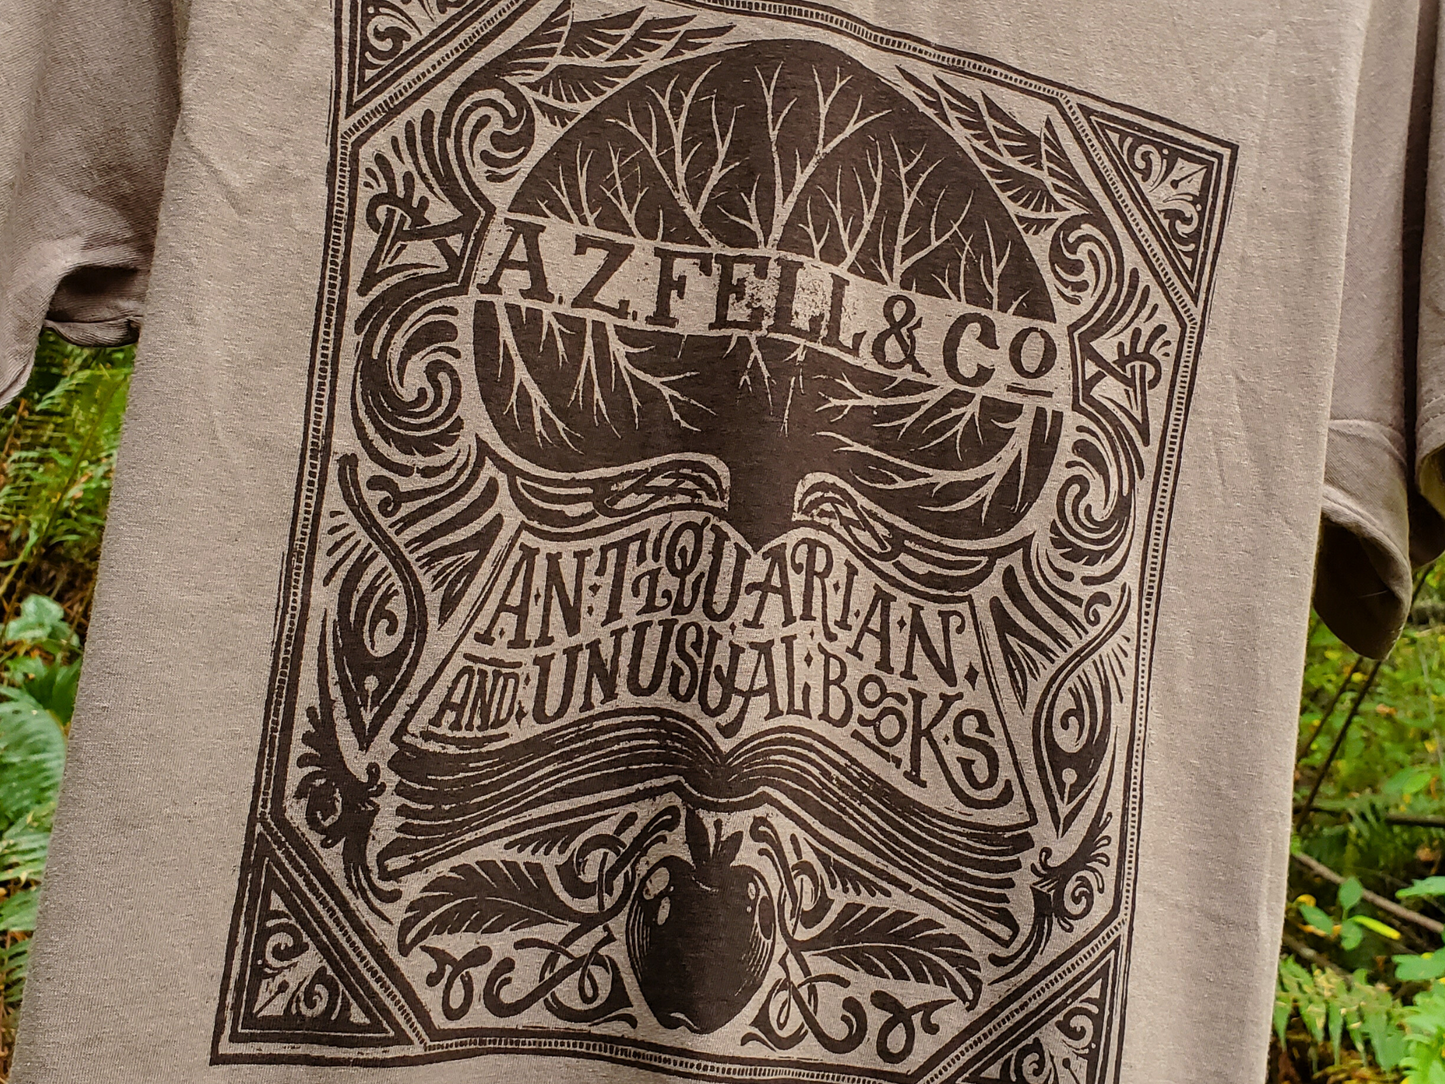 A.Z. FELL & CO Antiquities and Unusual Books Shirt - Brown